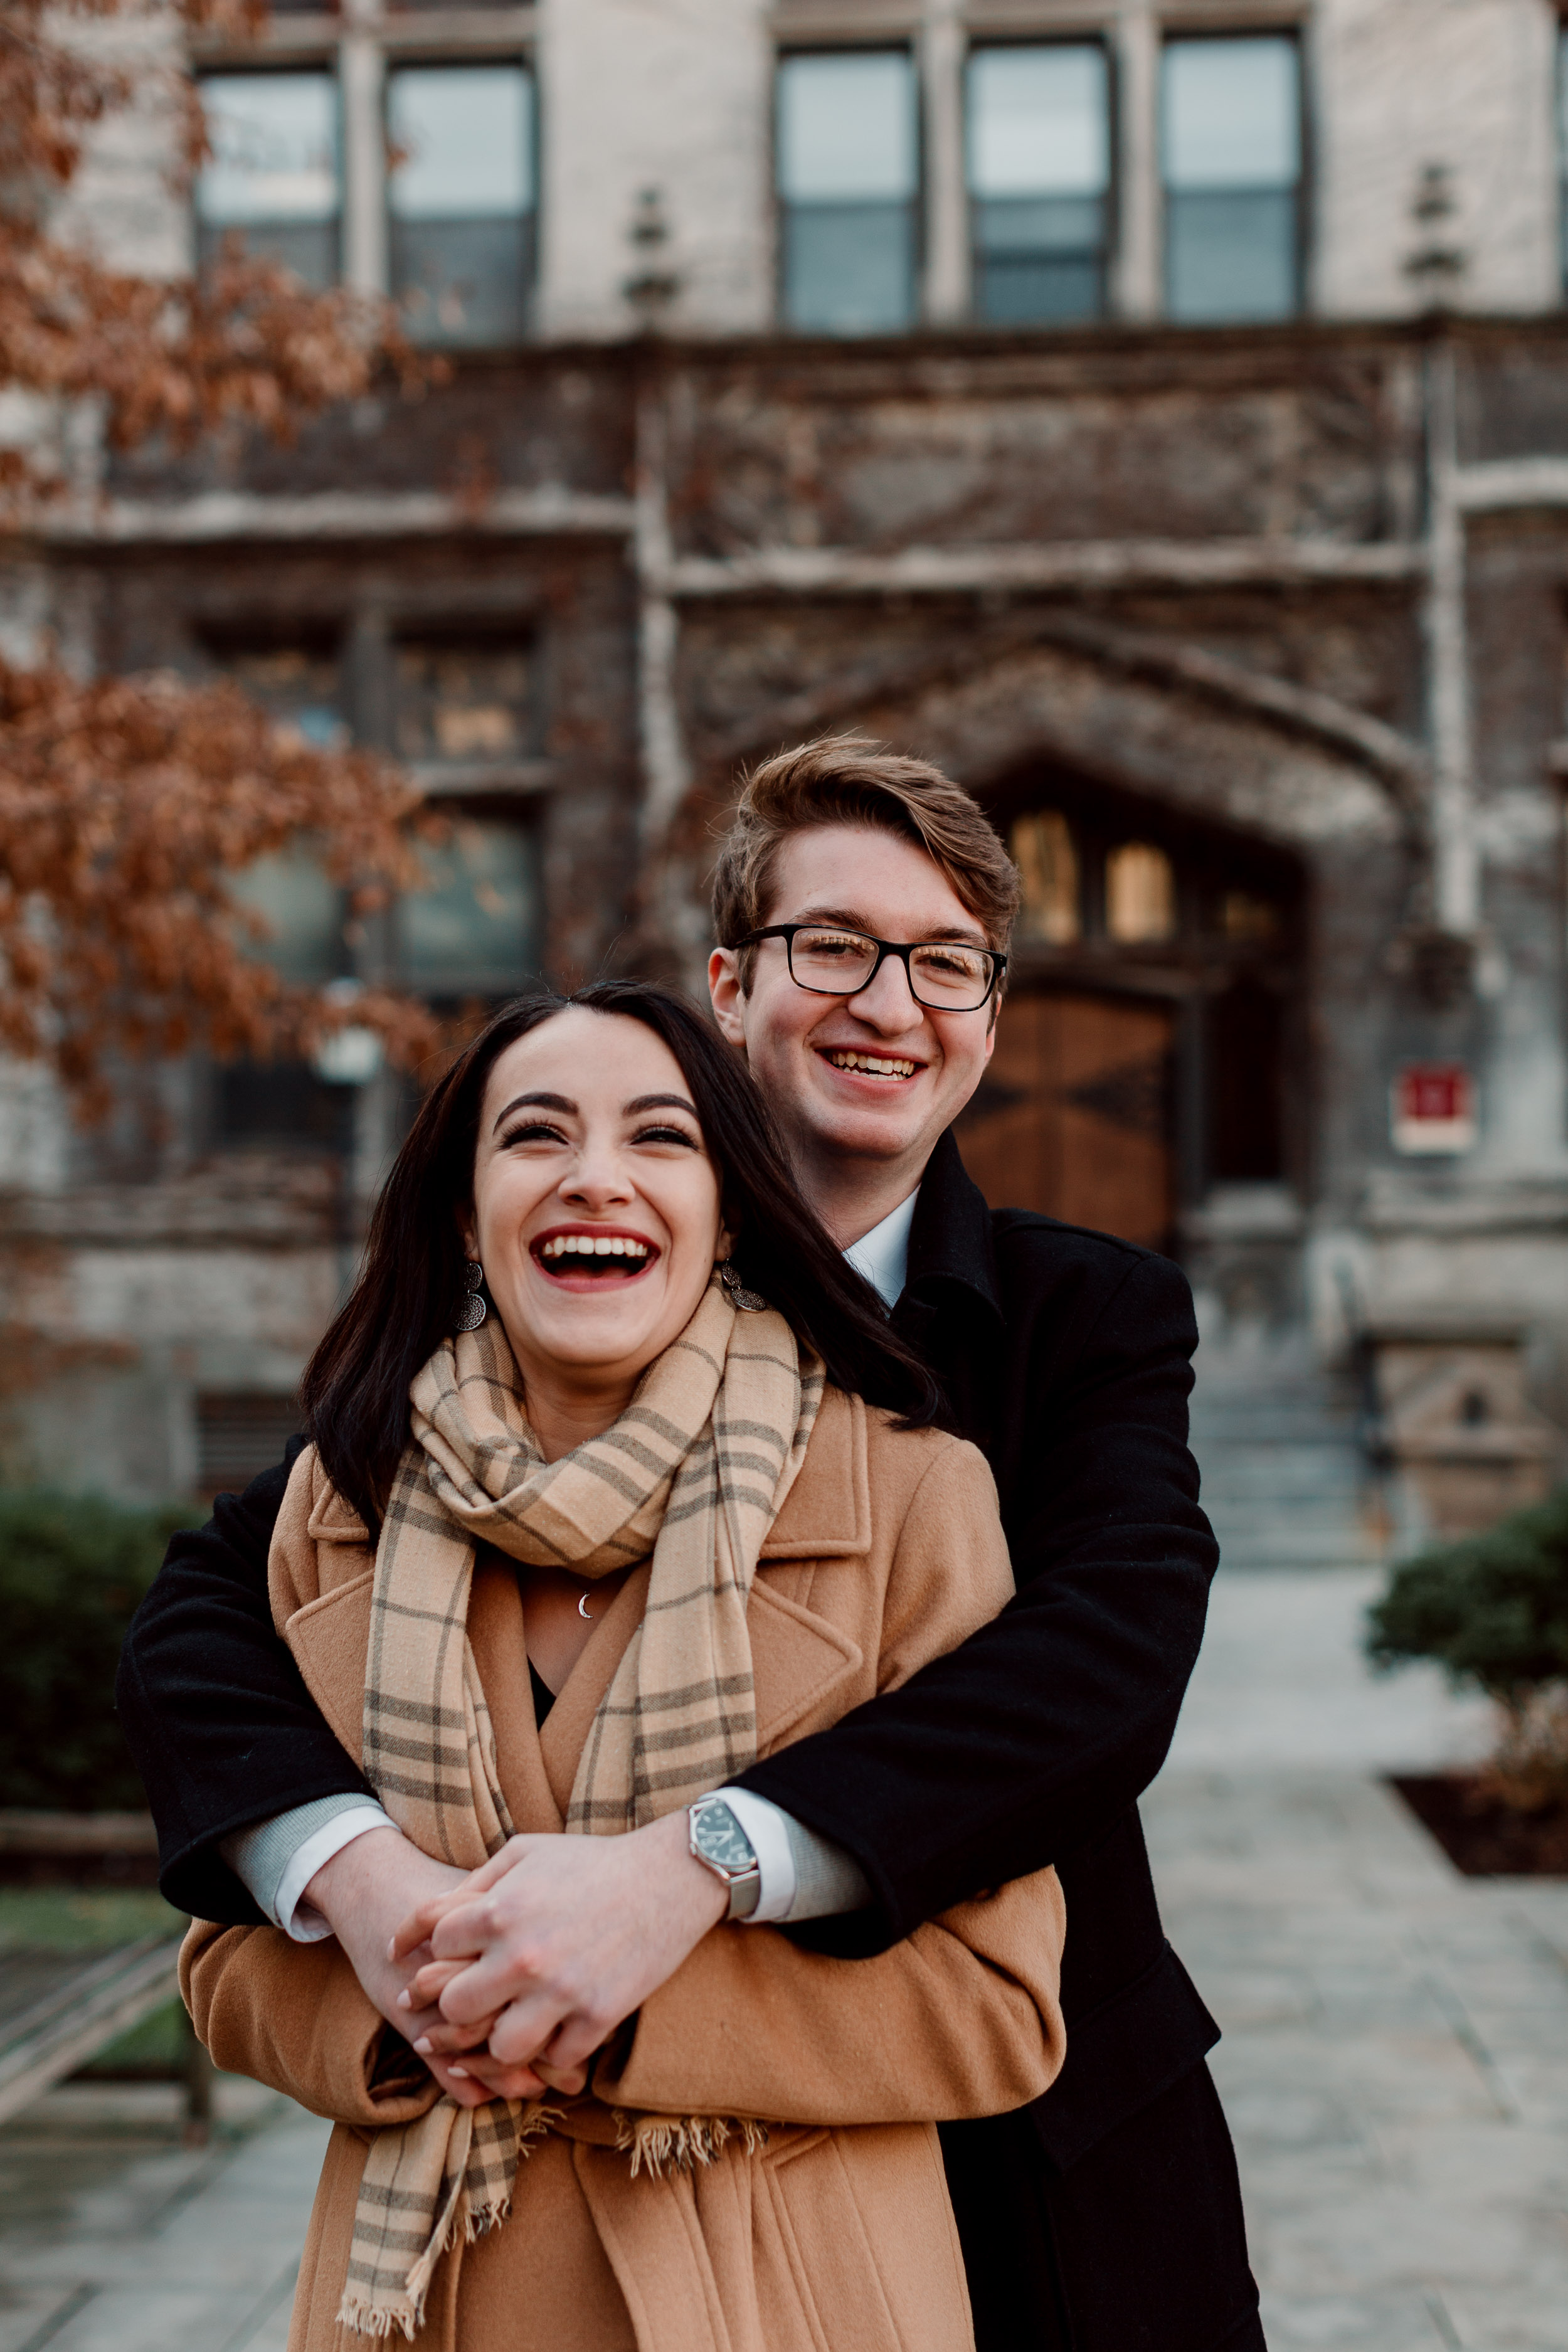 Candid poses for engagement photo sessions | University of Chicago campus engagement session | Chicago engagement photographer | Chicago engagement photo locations | Winter engagement in Chicago | Where to take Chicago engagement photos | Chicago skyline engagement